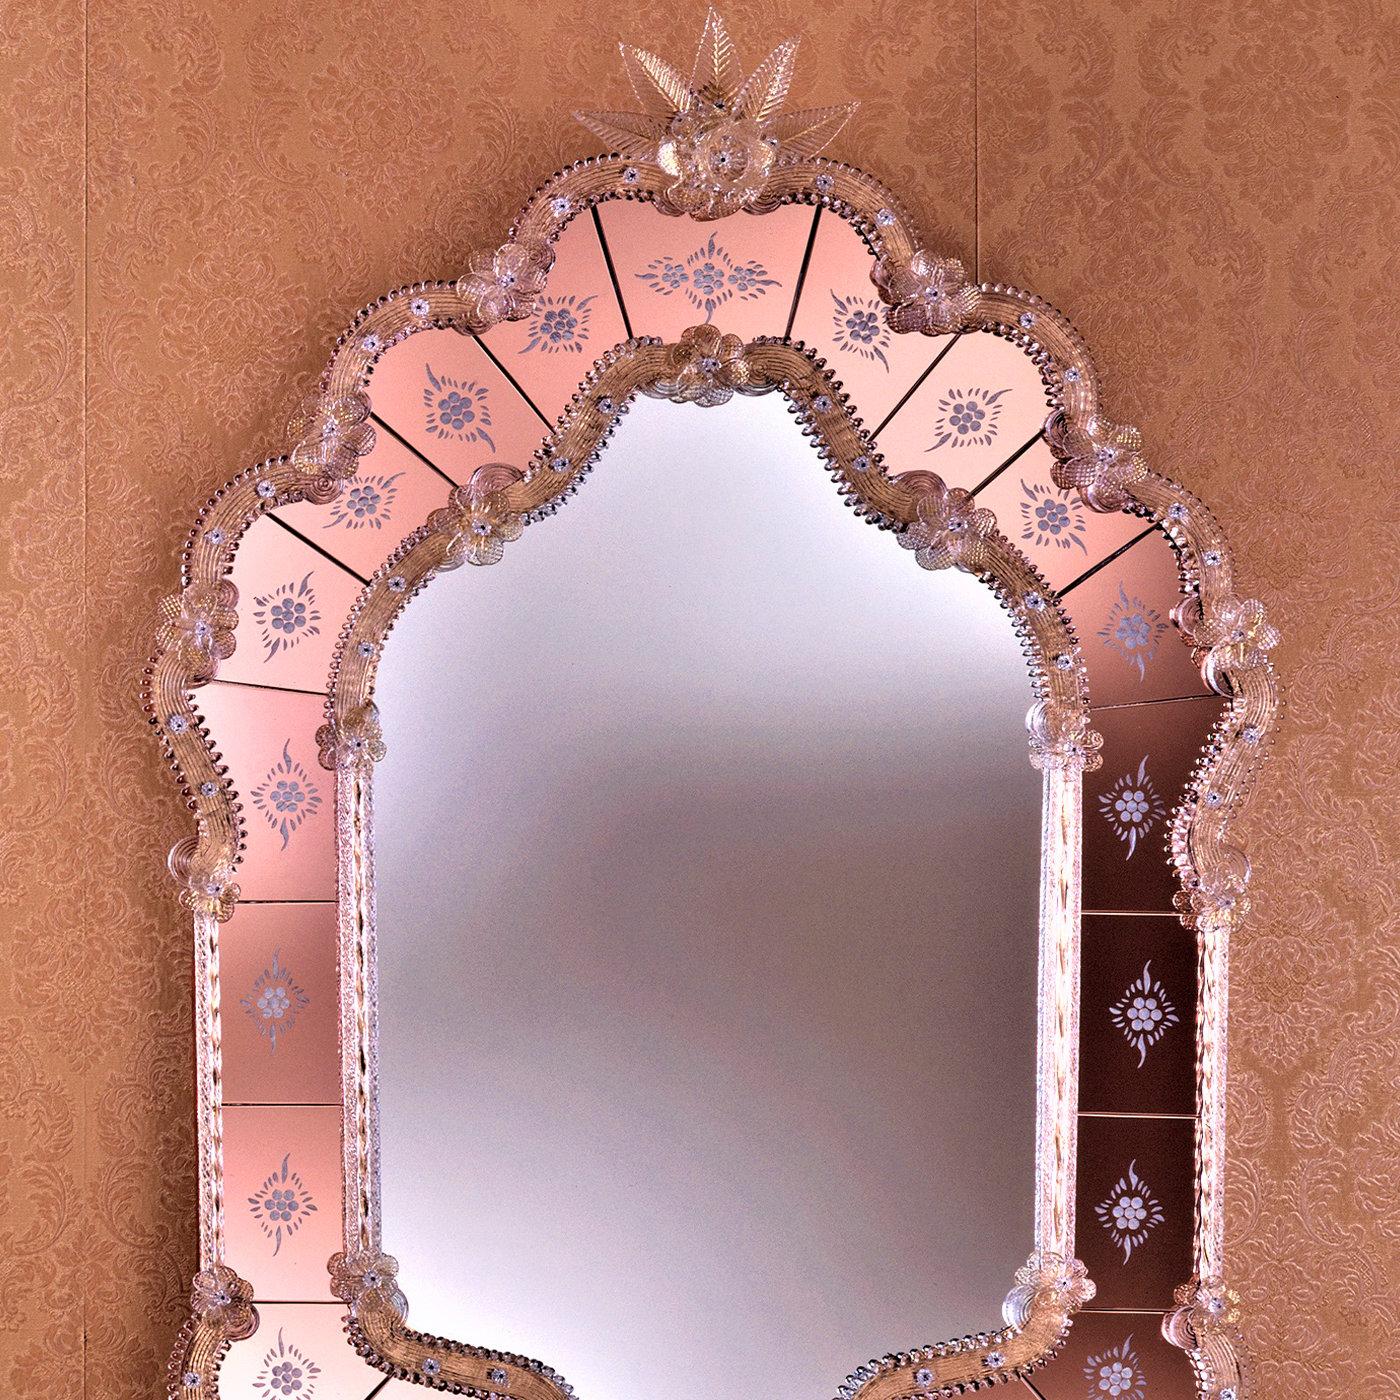 Bold yet feminine, this exceptional mirror handcrafted by Venetian master glassmakers will be a splendid focal point in classic or eclectic decors. The indented frame in golden crystal accented with matching leaves and flowers follows the sinuous